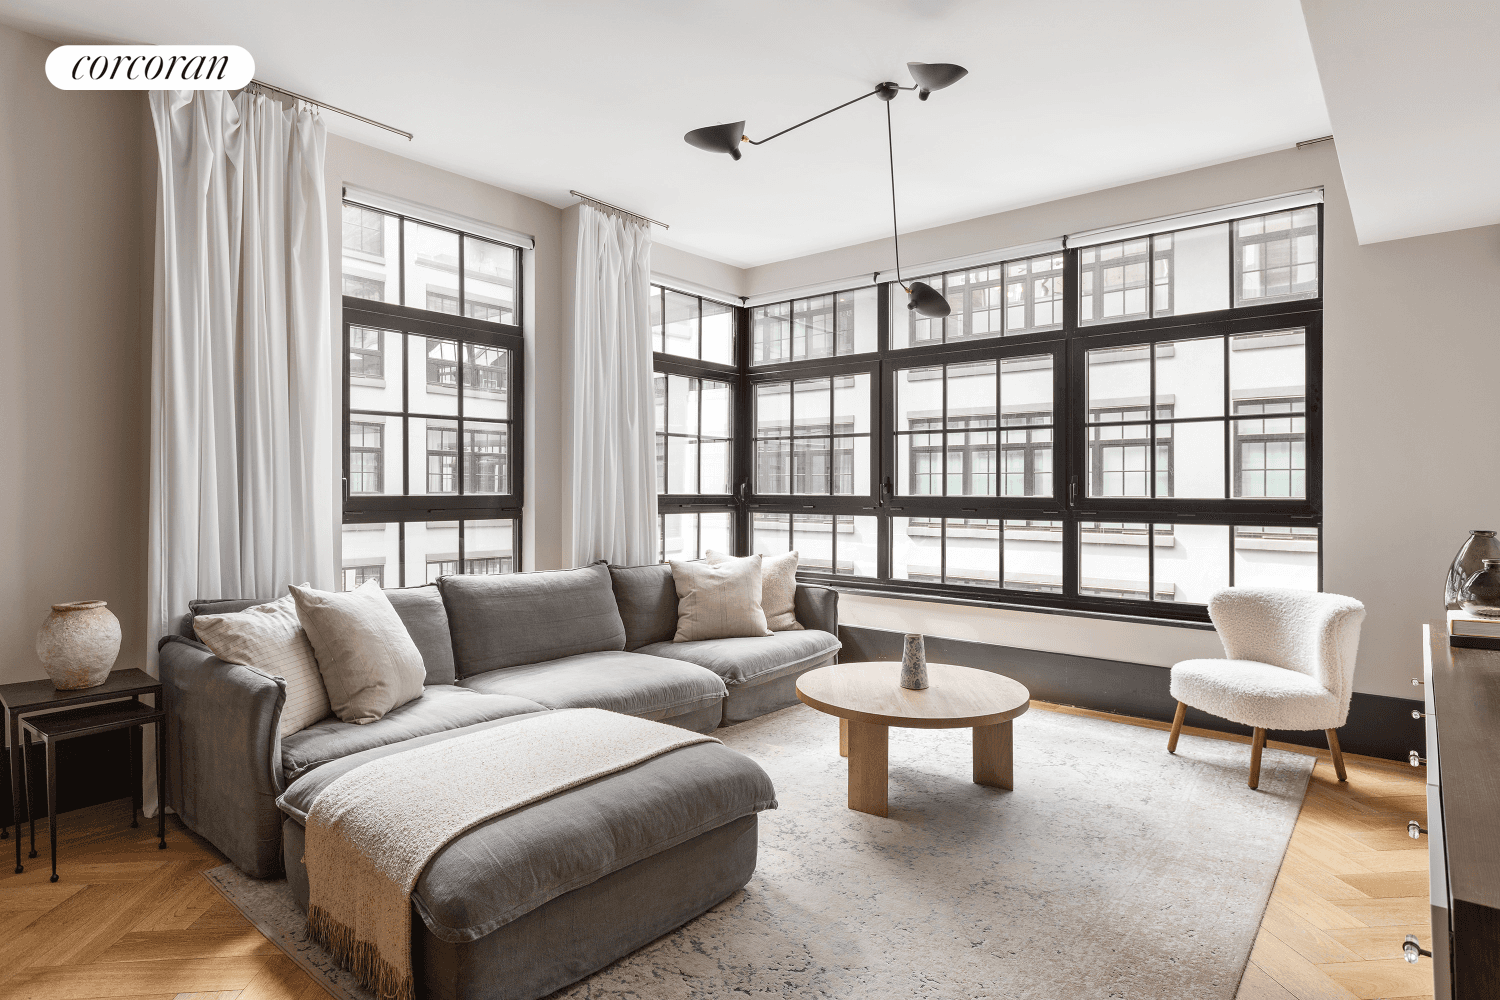 If you have been looking for more than just a cookie cutter 2 bedroom condo in Dumbo that exceeds ALL expectations in terms of scale, design, amenities and location, then ...